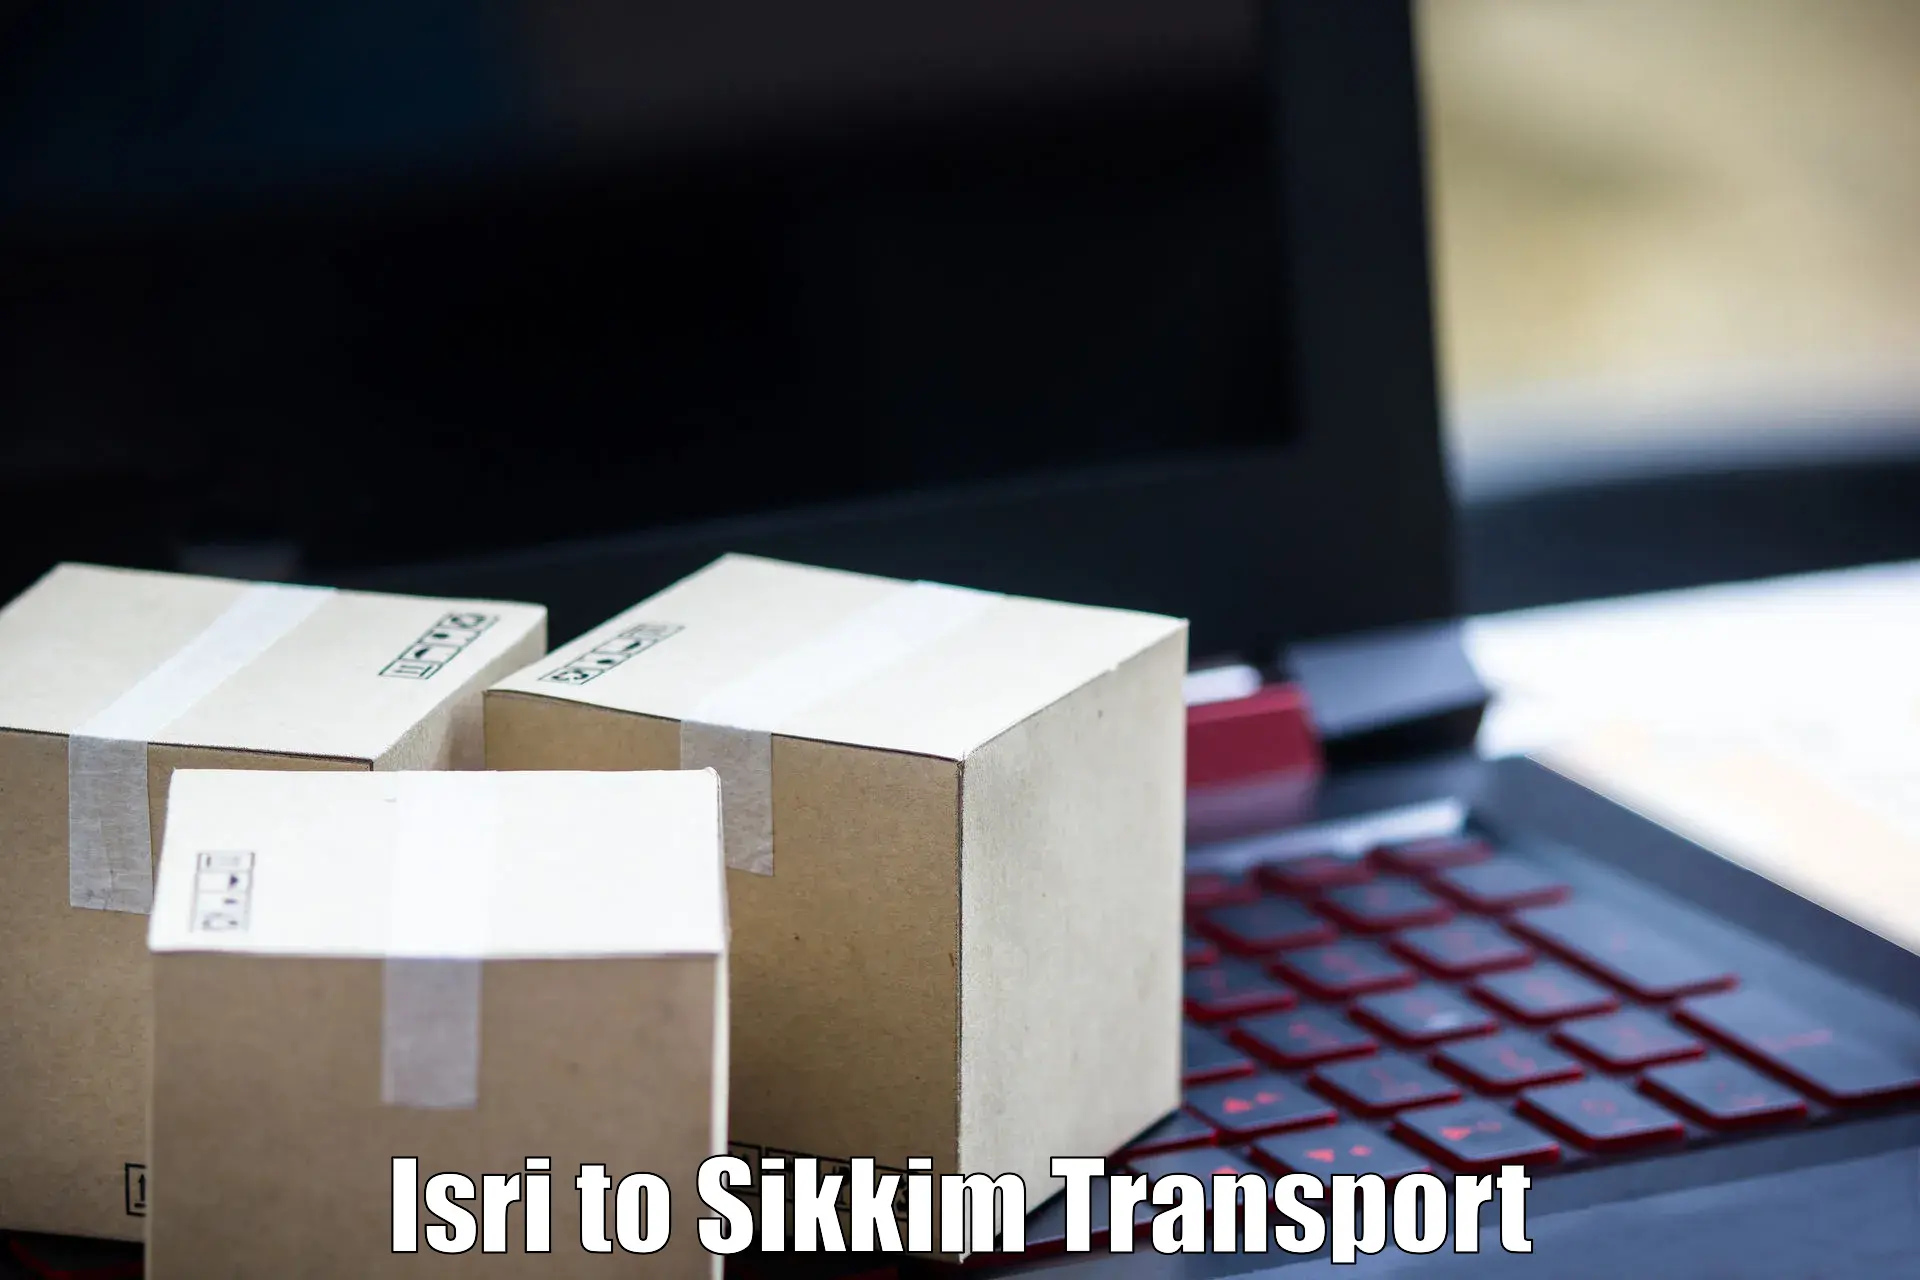 Cargo train transport services Isri to Pelling